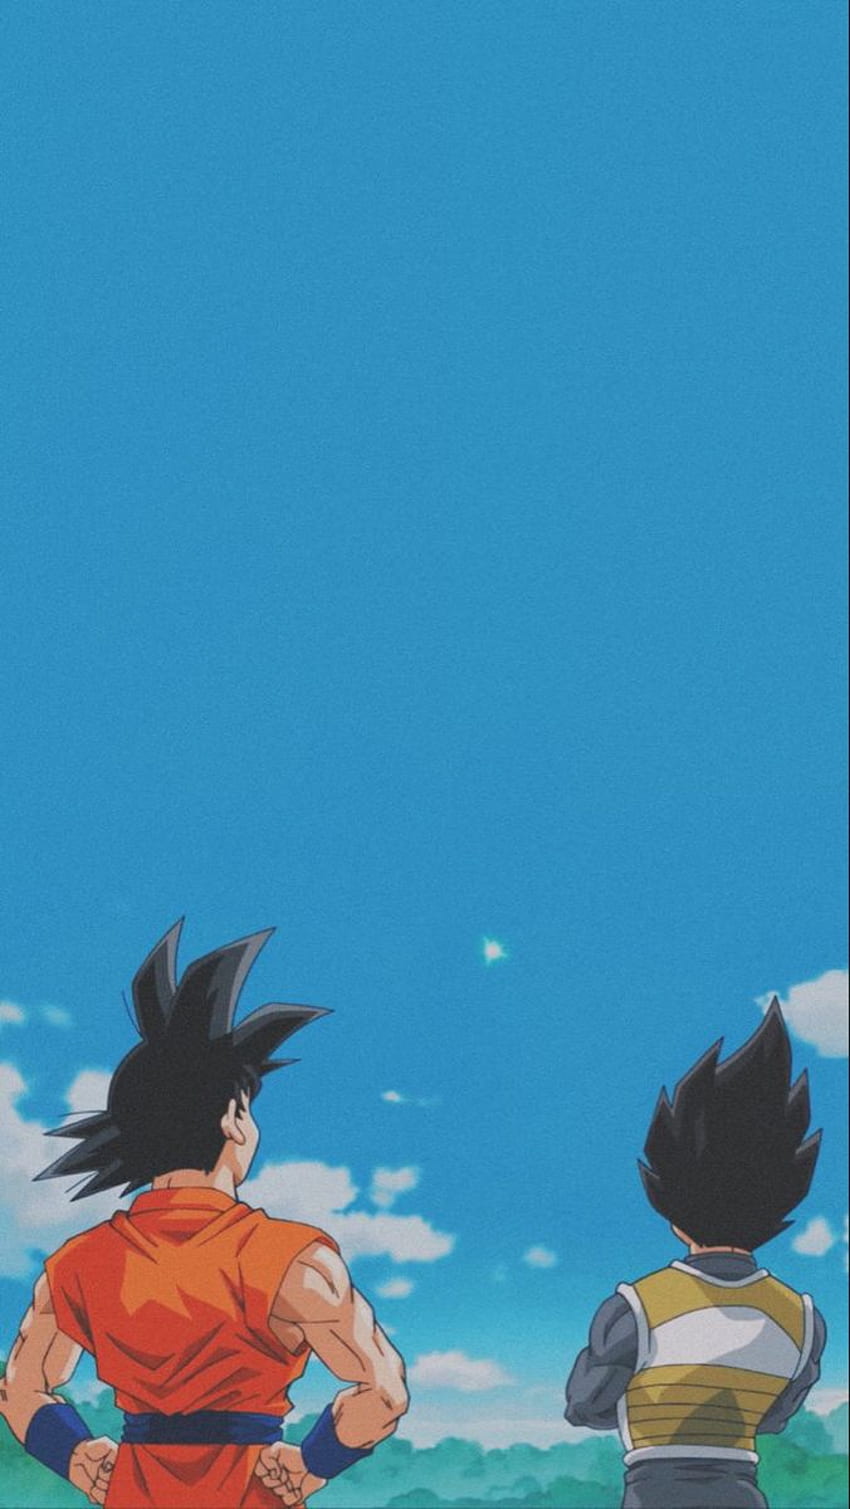 AWESOME 15 Best Wallpaper Dragon Ball Super for Phone 16  Anime dragon  ball super Dragon ball artwork Anime dragon ball